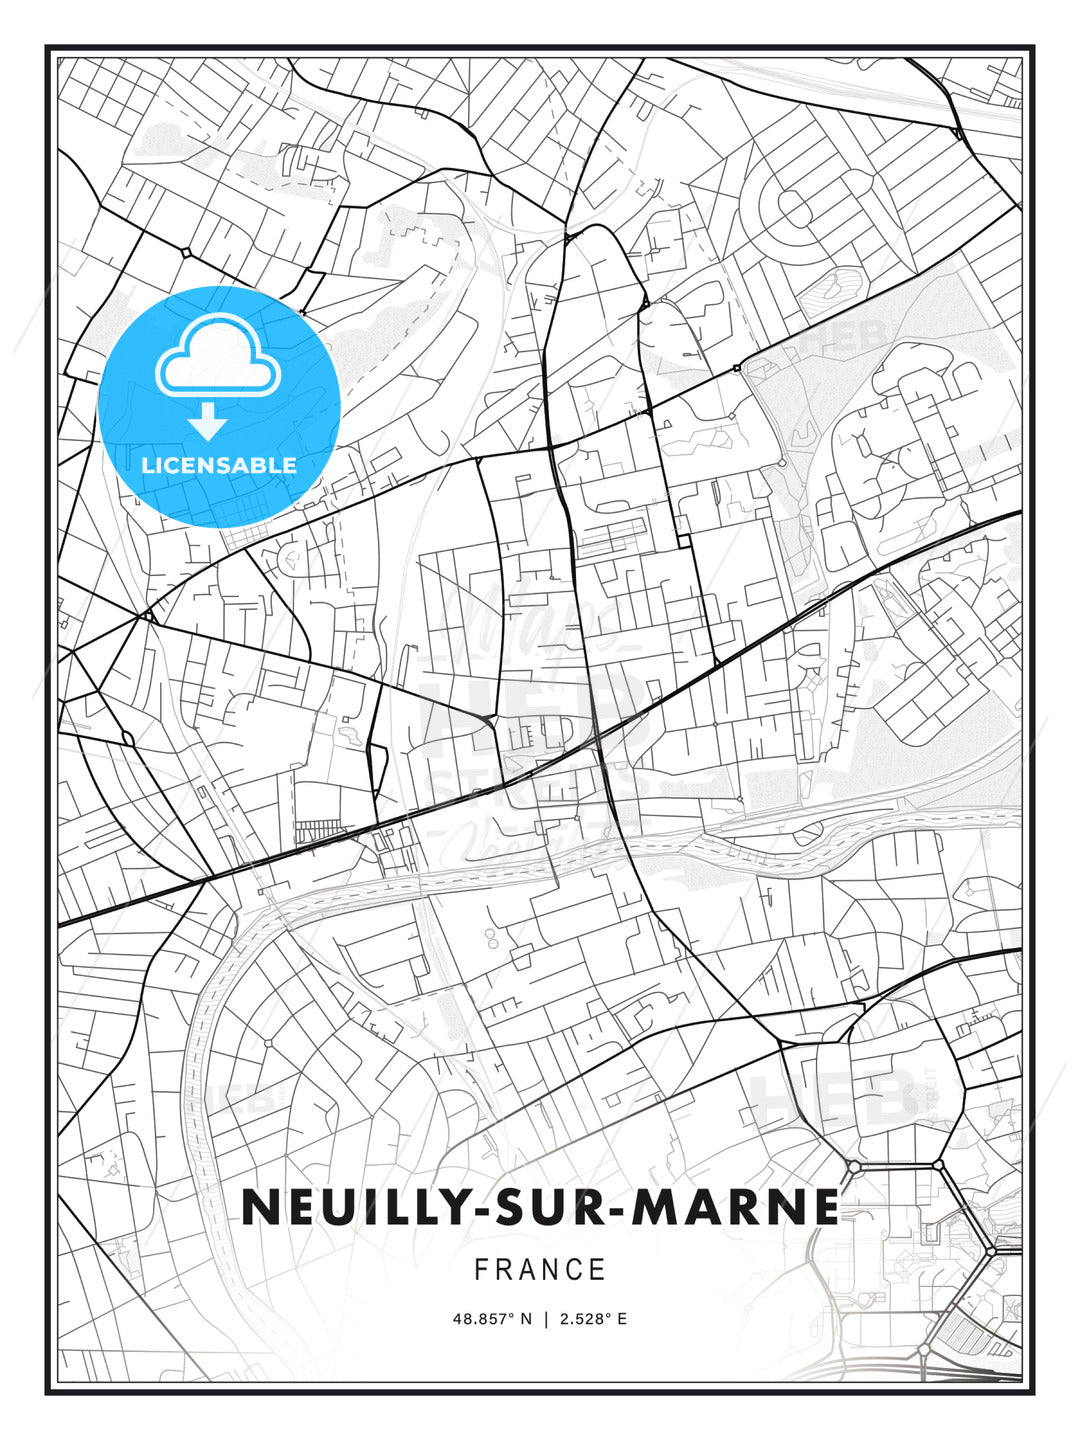 Neuilly-sur-Marne, France, Modern Print Template in Various Formats - HEBSTREITS Sketches